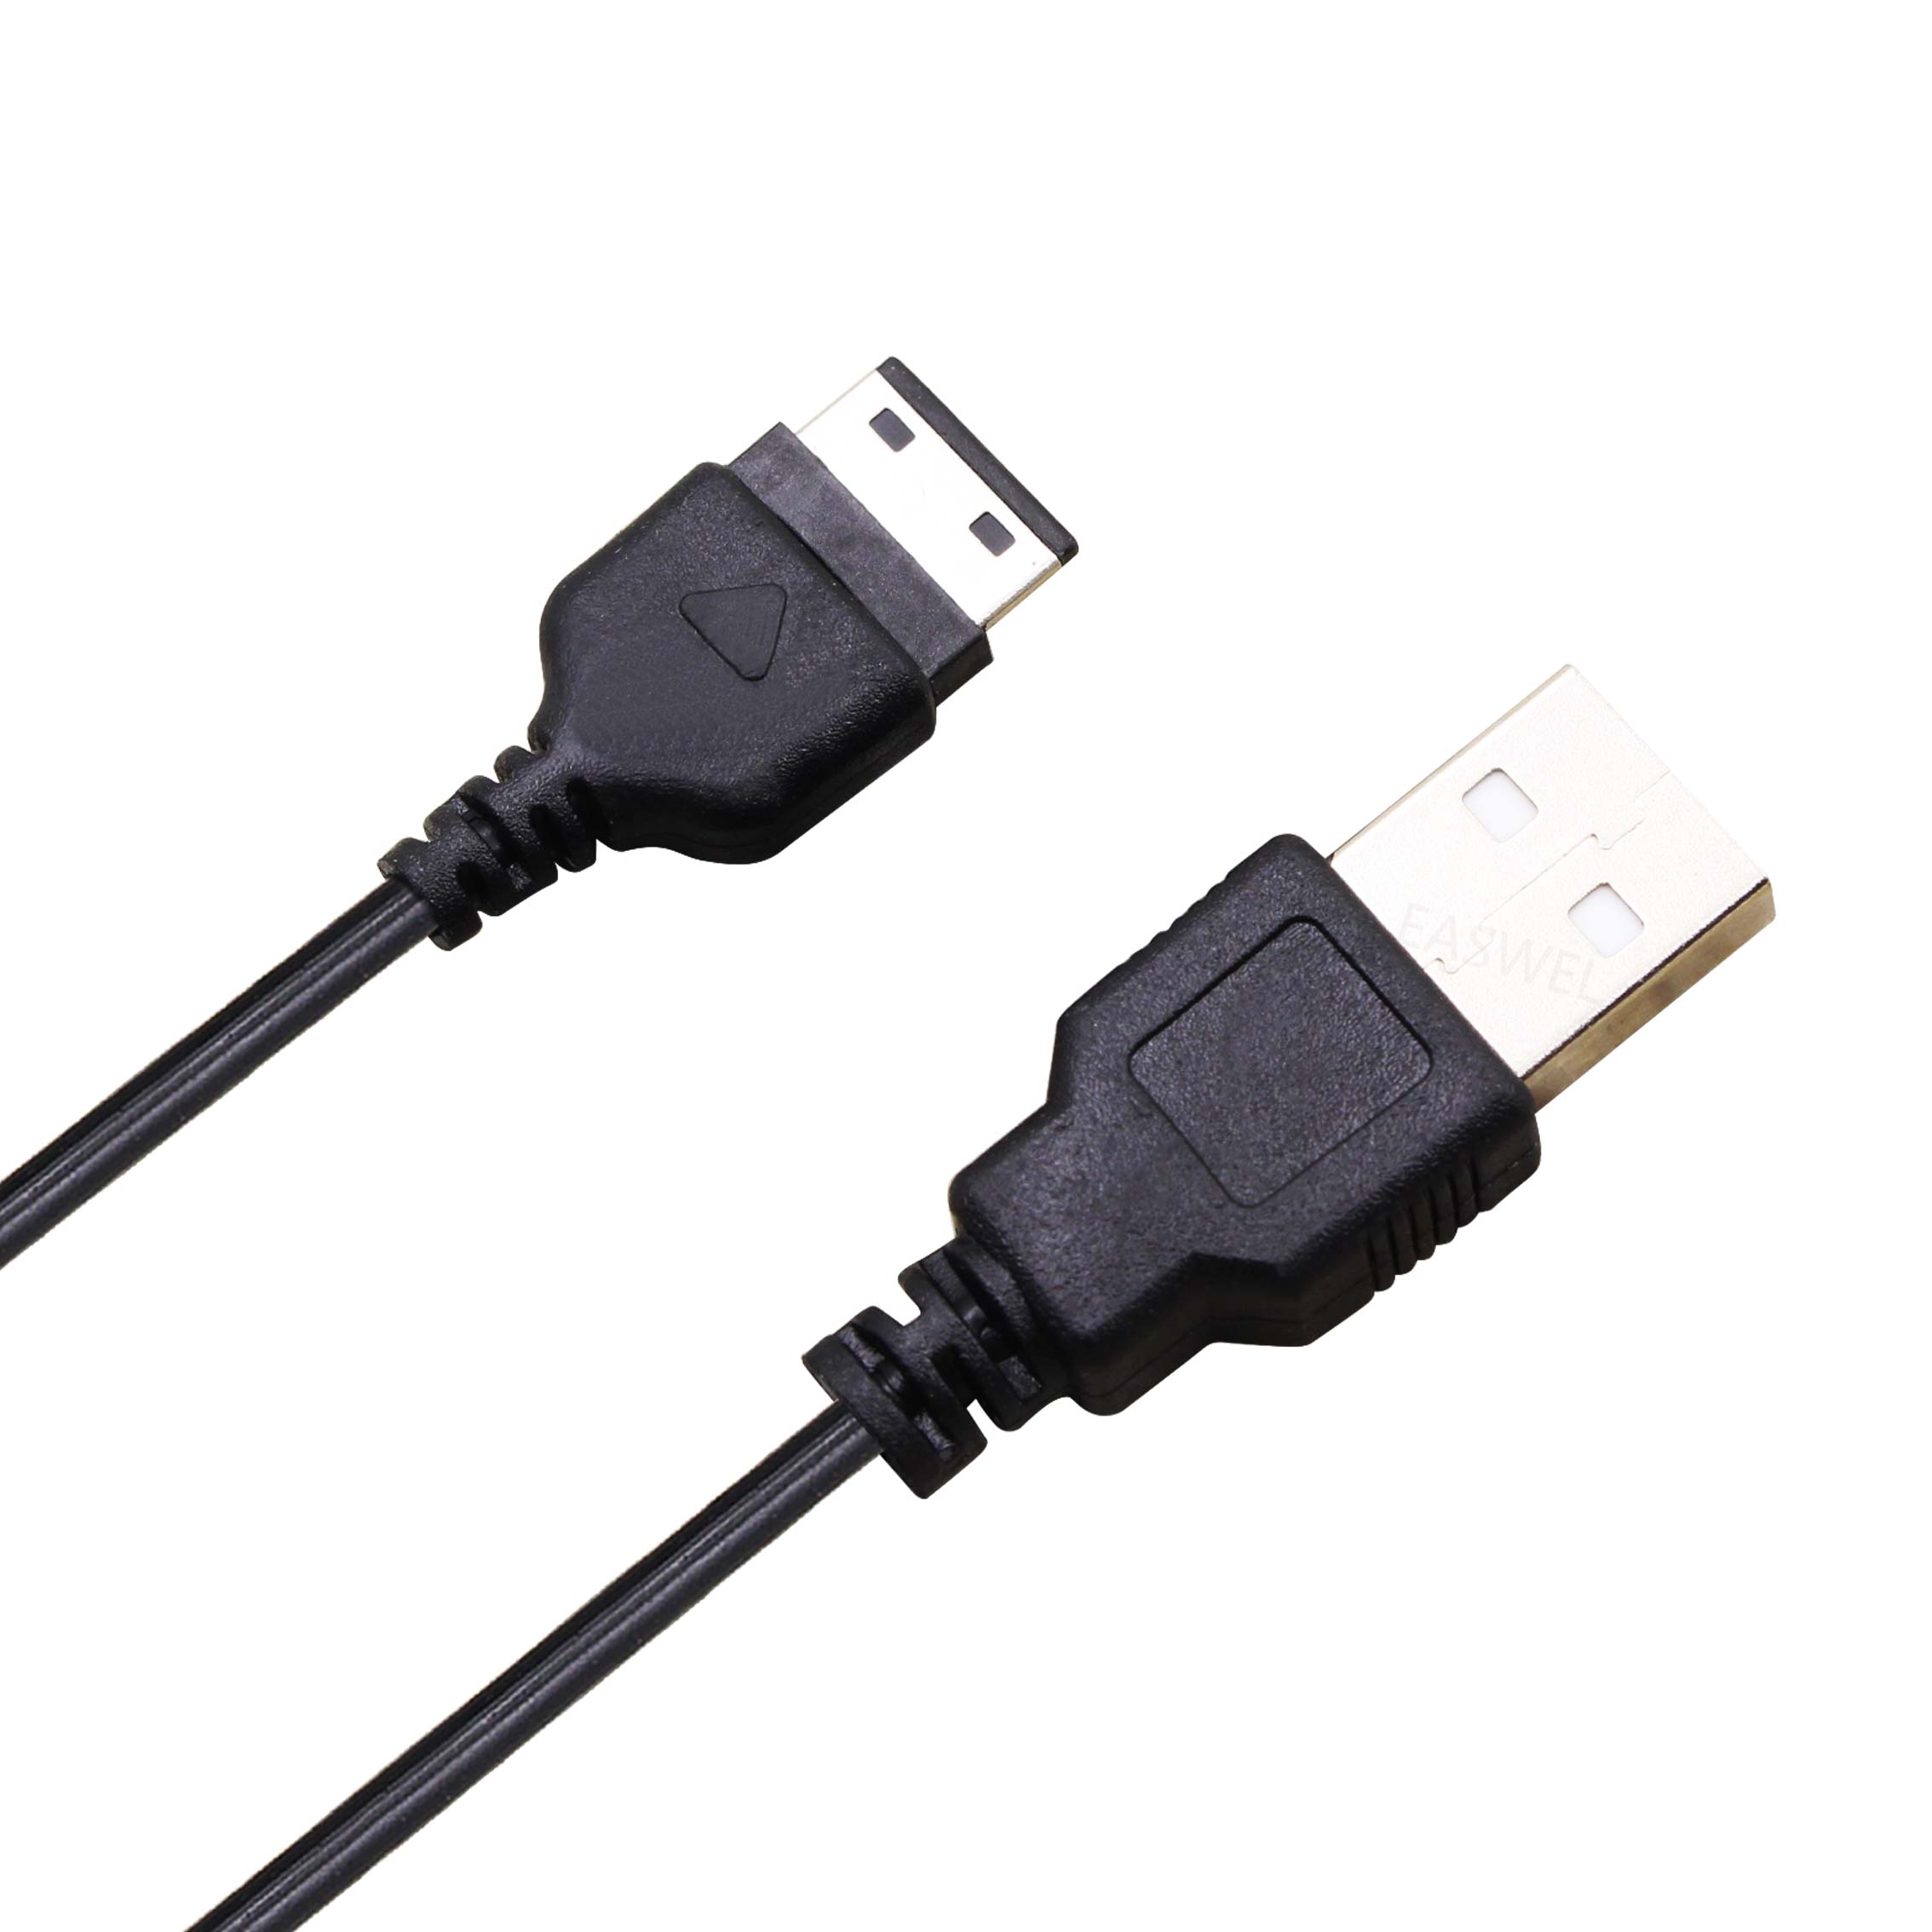 Usb Charger Data Cable Koord Voor Samsung Gt-b7620 Sgh-c140 Sgh-c180 Sgh-c270